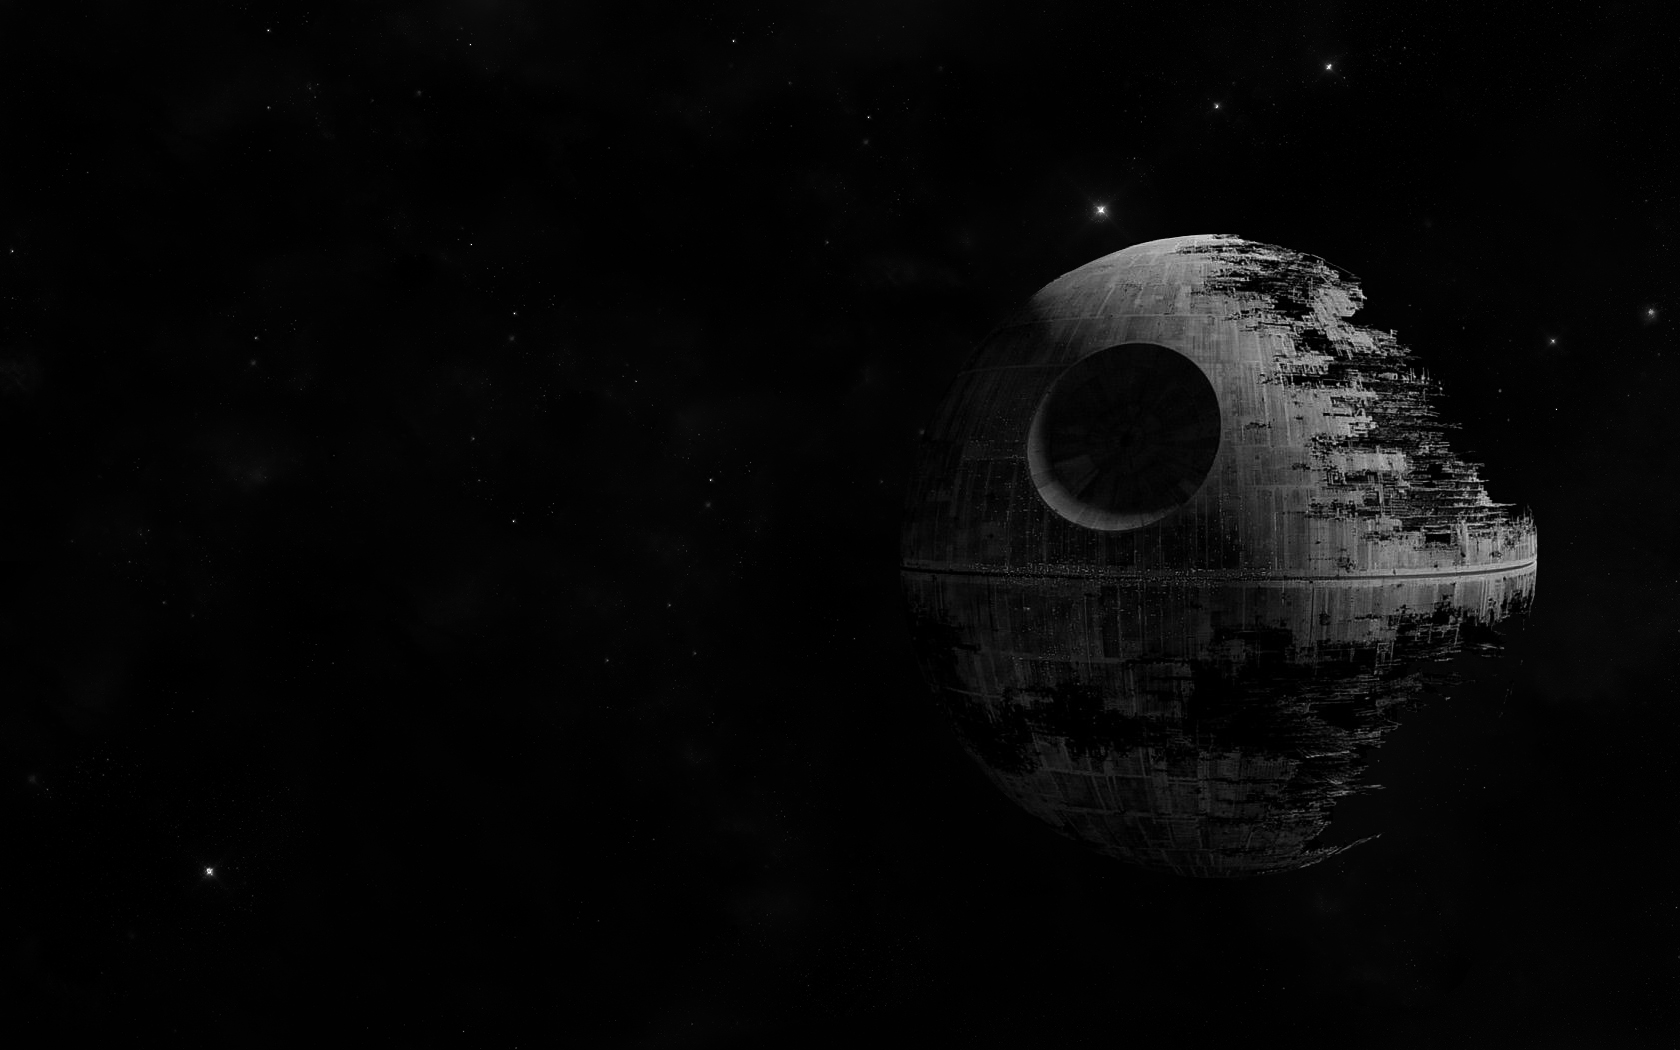 The Death Star, an ultimate weapon of the Empire from Star Wars, depicted in this Sci-Fi desktop wallpaper.